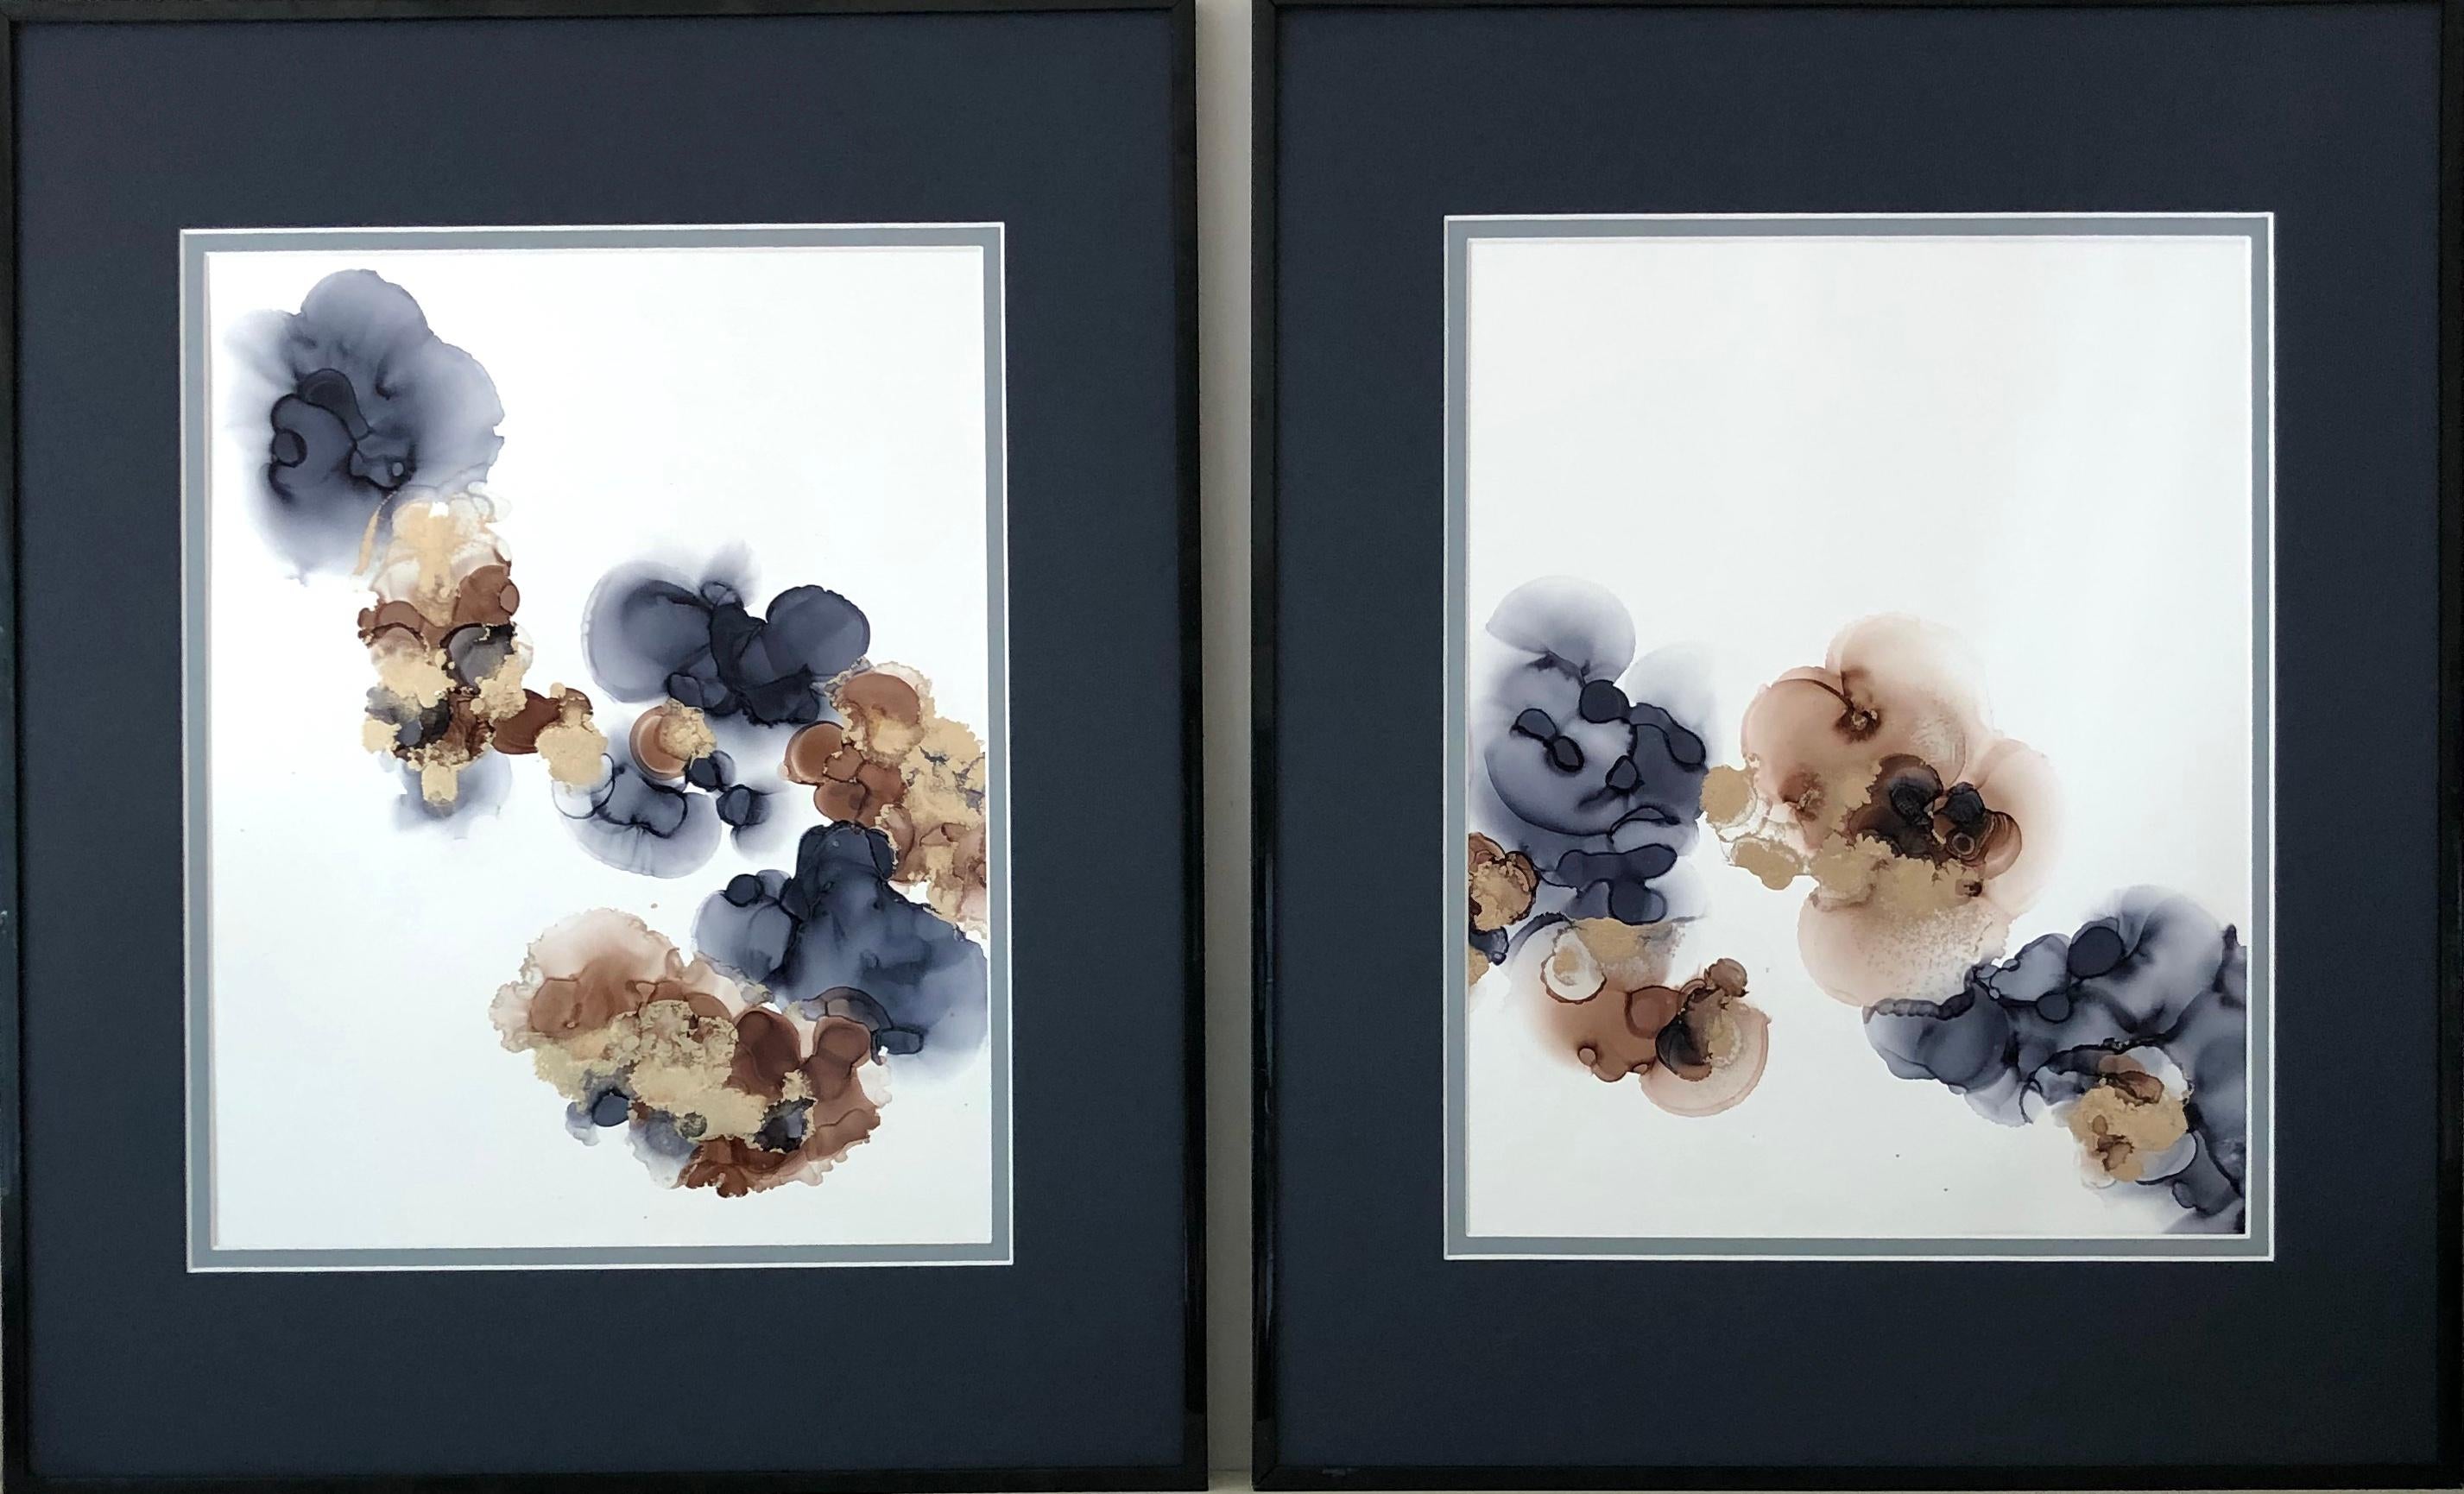 Delicacy - abstraction art, made in gold, brown, gray and navy blue 